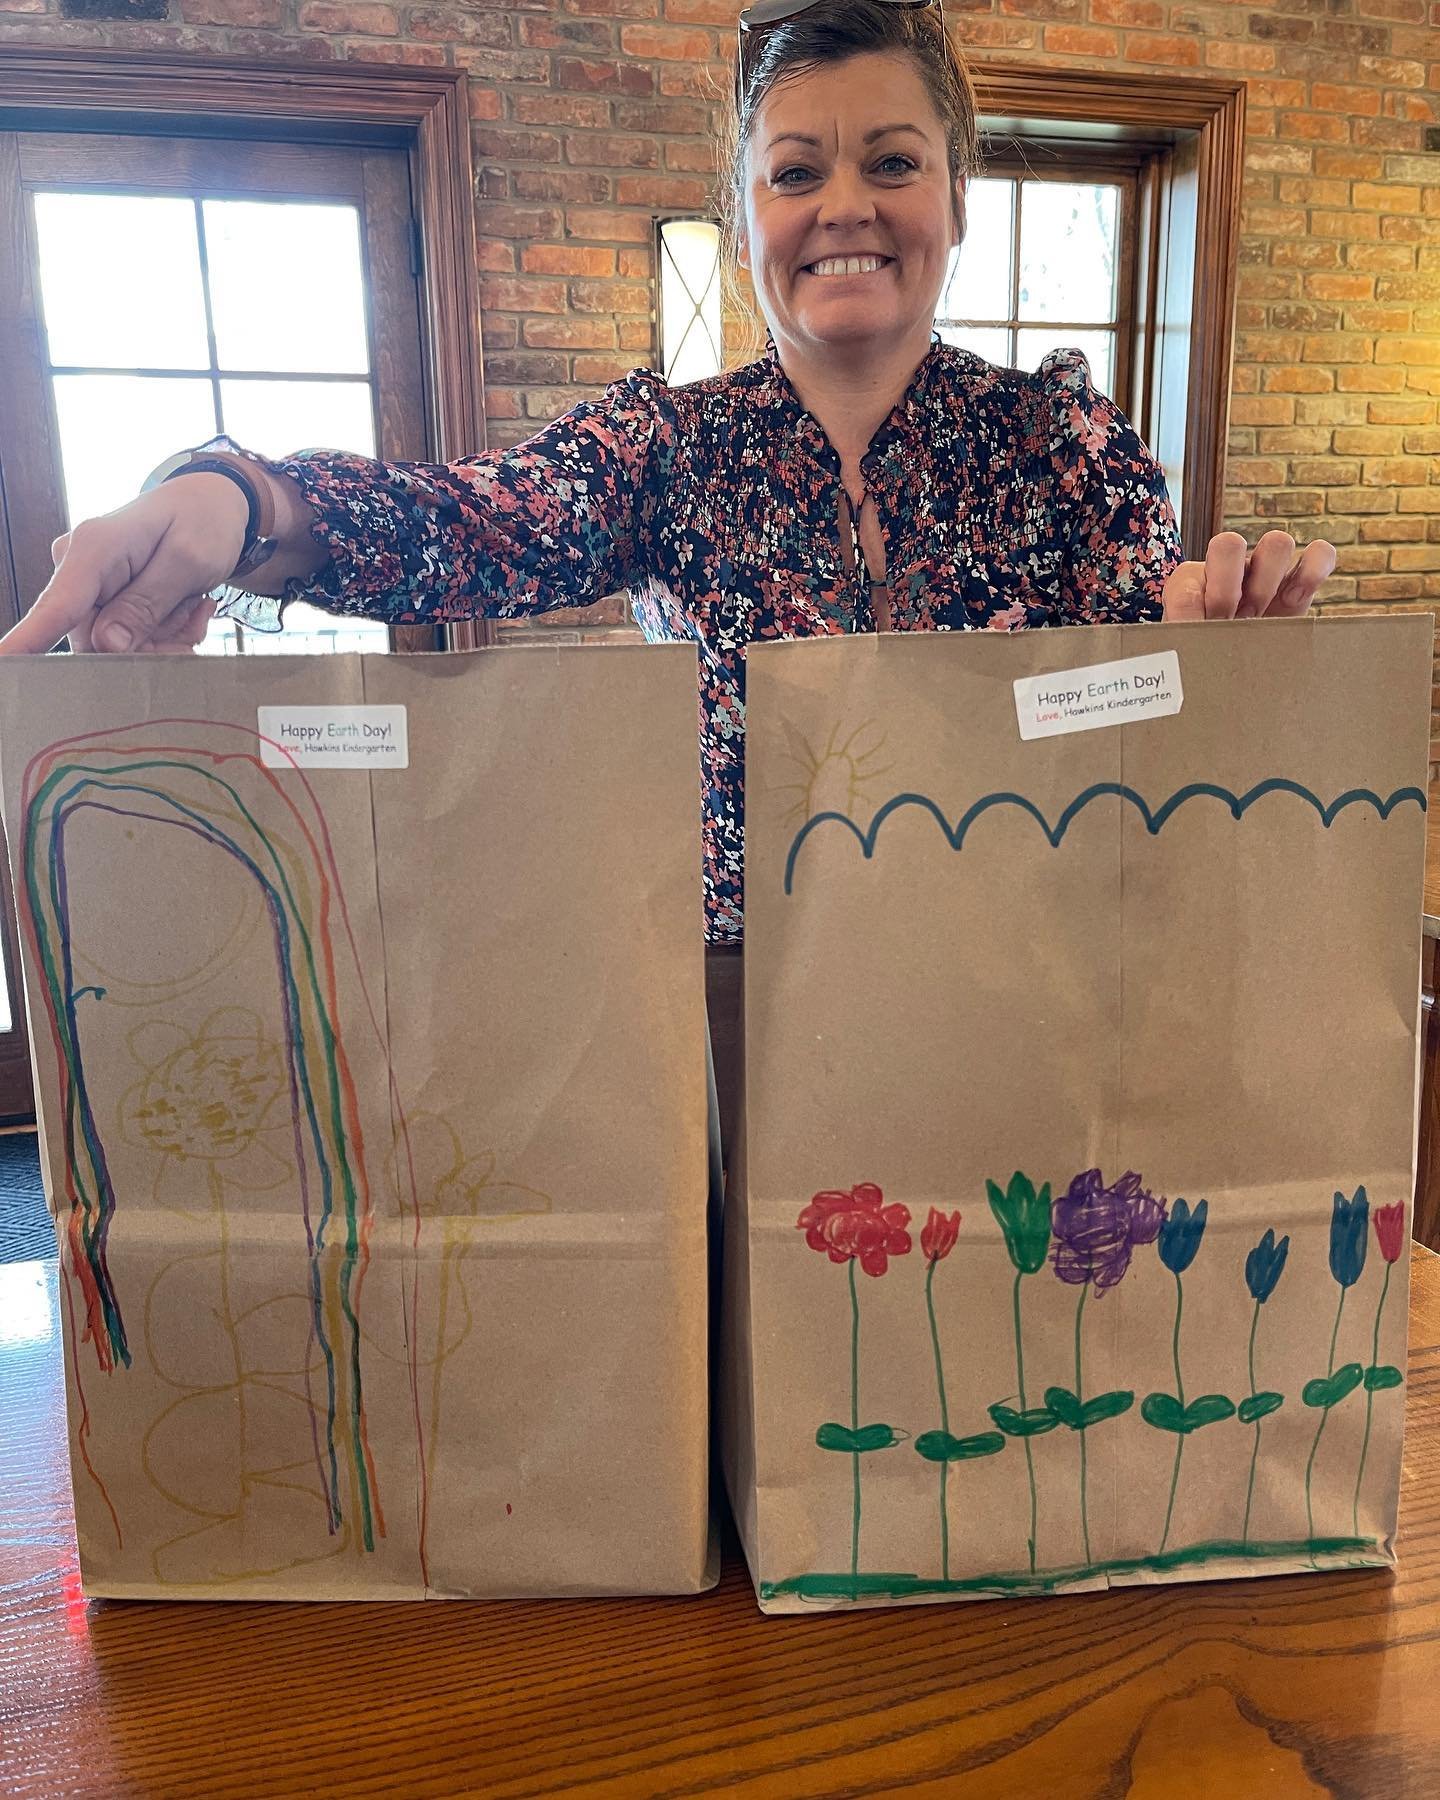 What a happy surprise! 

Thank you to the artists of Hawkins Kindergarten for sharing your hearts and art with us! 

You sure made our Kroger delivery more fun! And you made our day!🌷🌈☀️

Shop Brighton Kroger for your very own Earth Day art! 🌎 🎨?